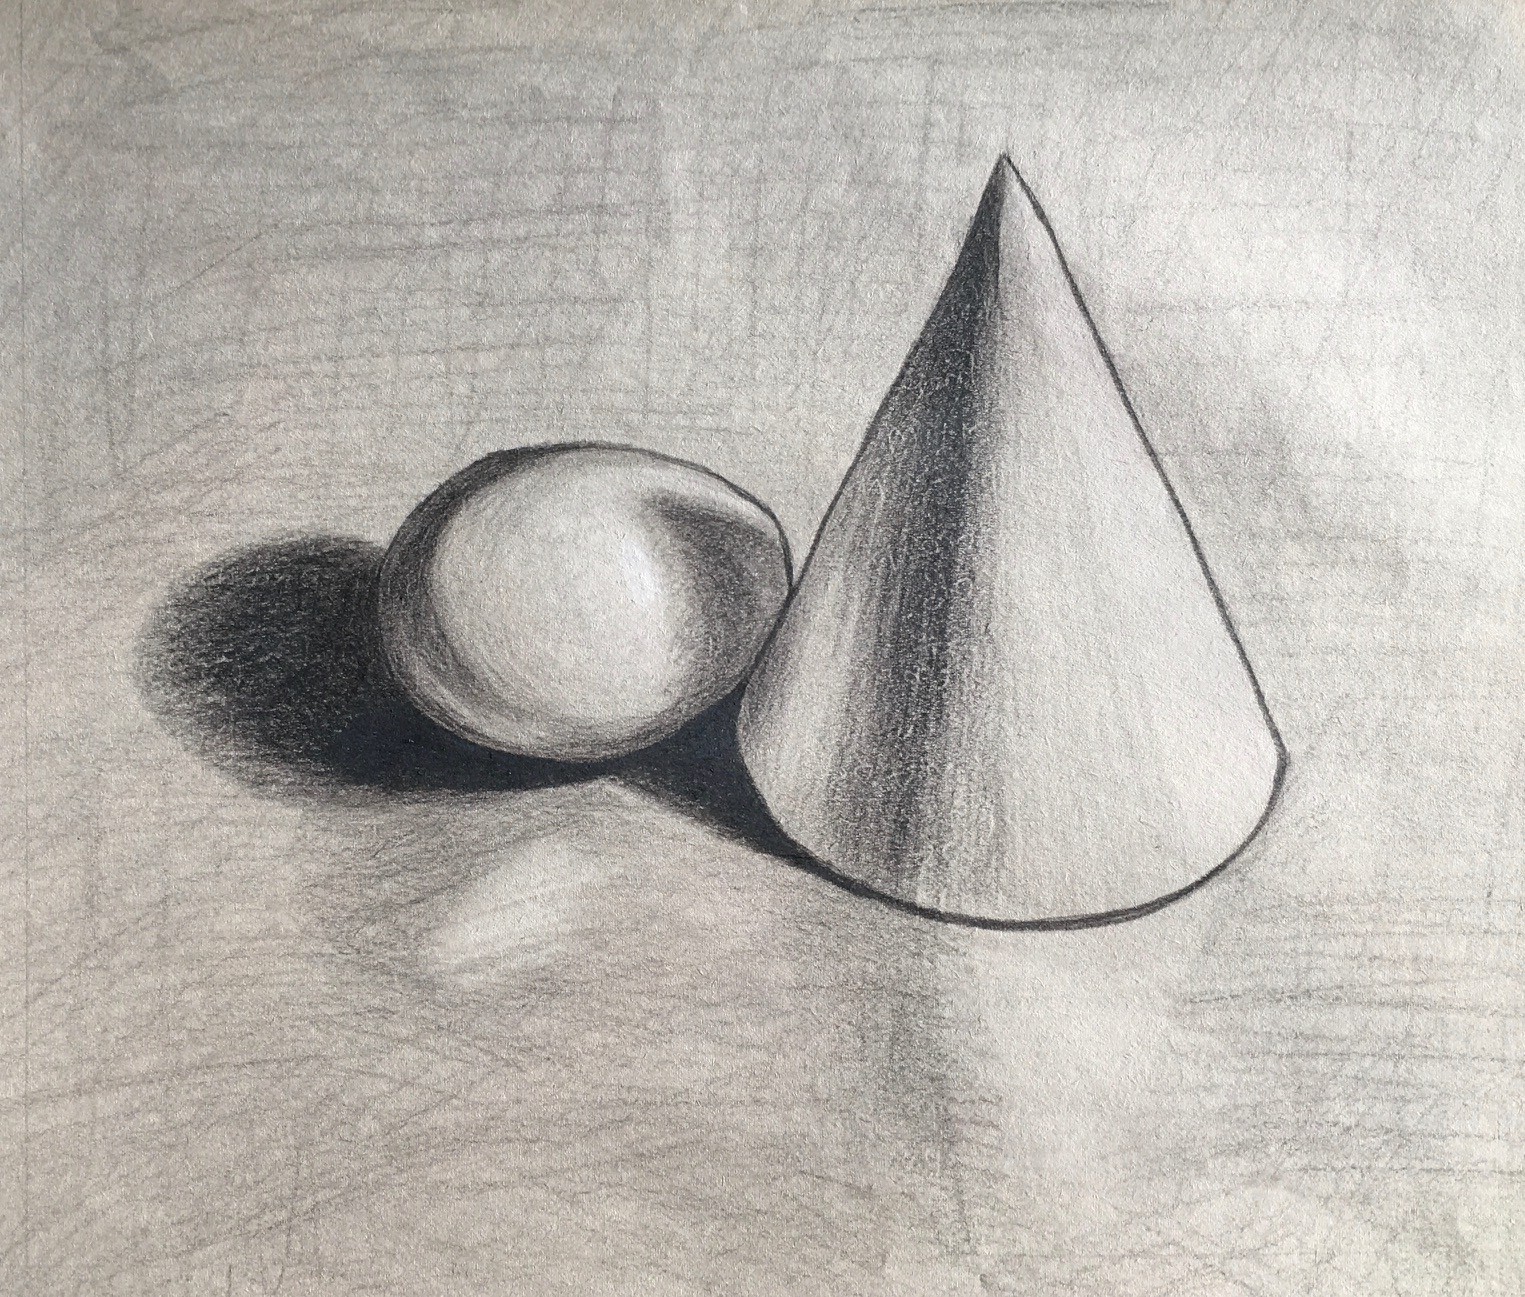 Egg and Cone, 2018
Pencil and White Colored Pencil on Paper
10"W x 9"H, Walli White, artist